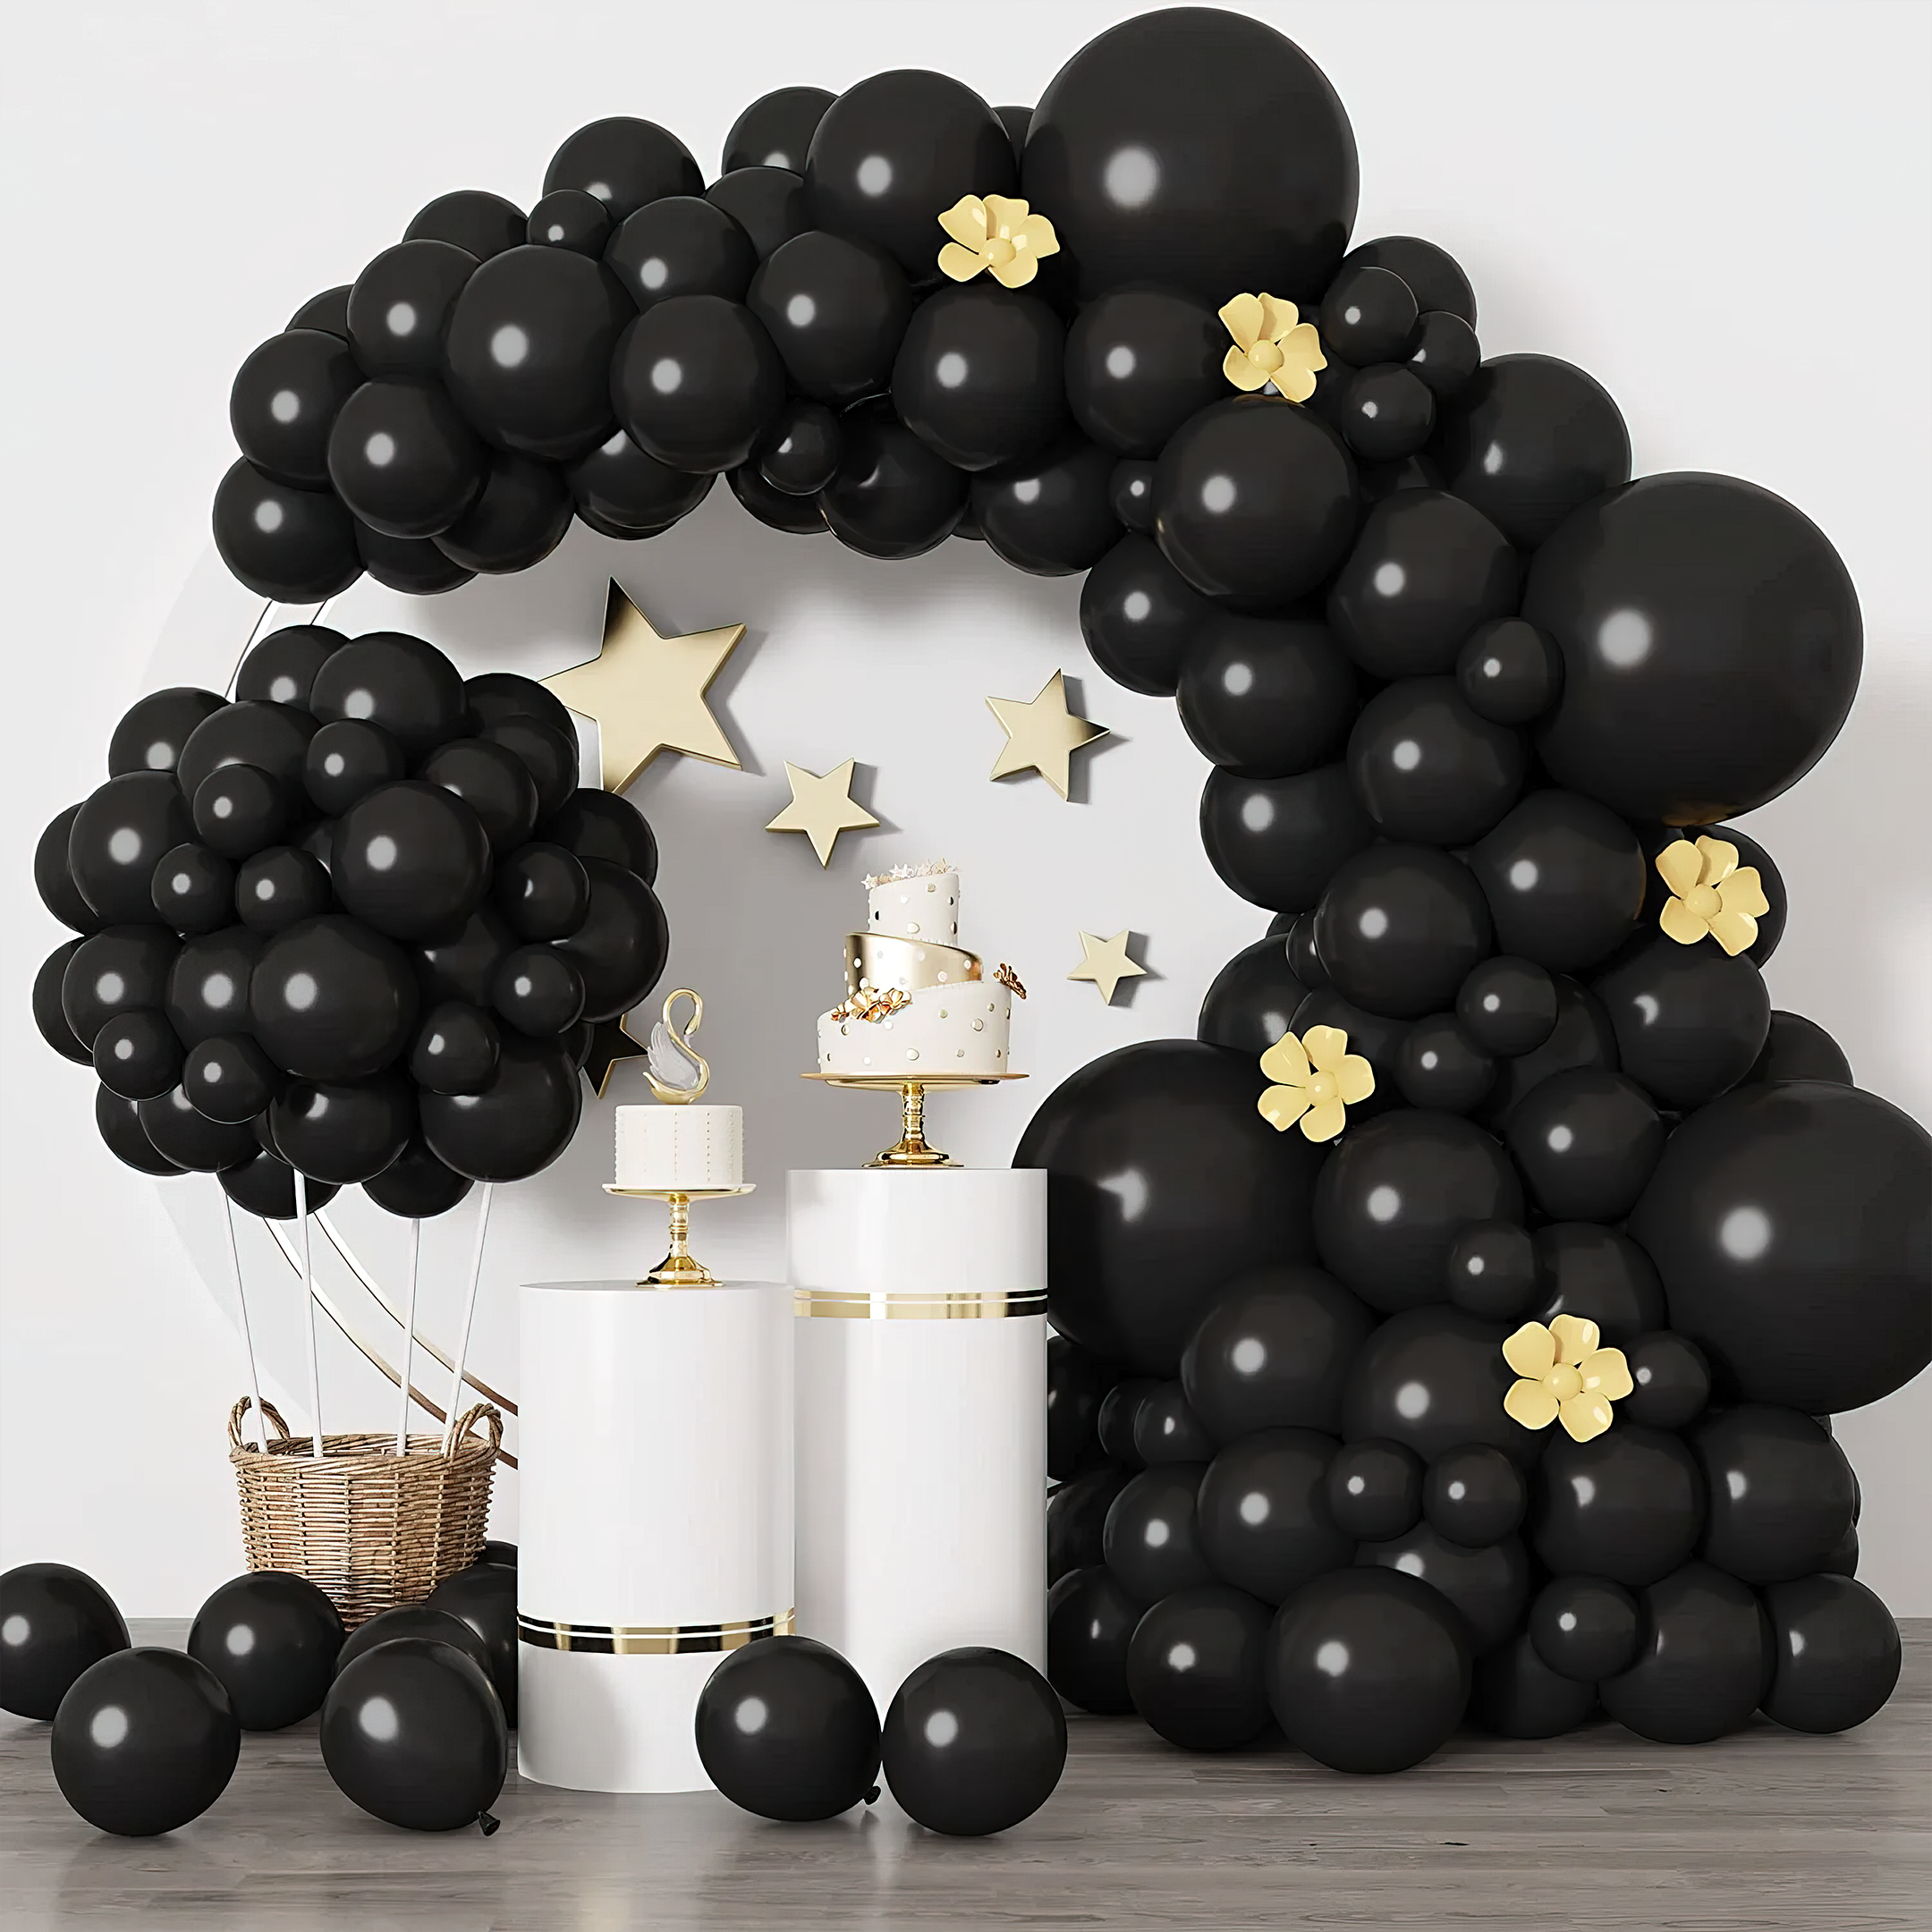 Black party balloons for theme party & Halloween